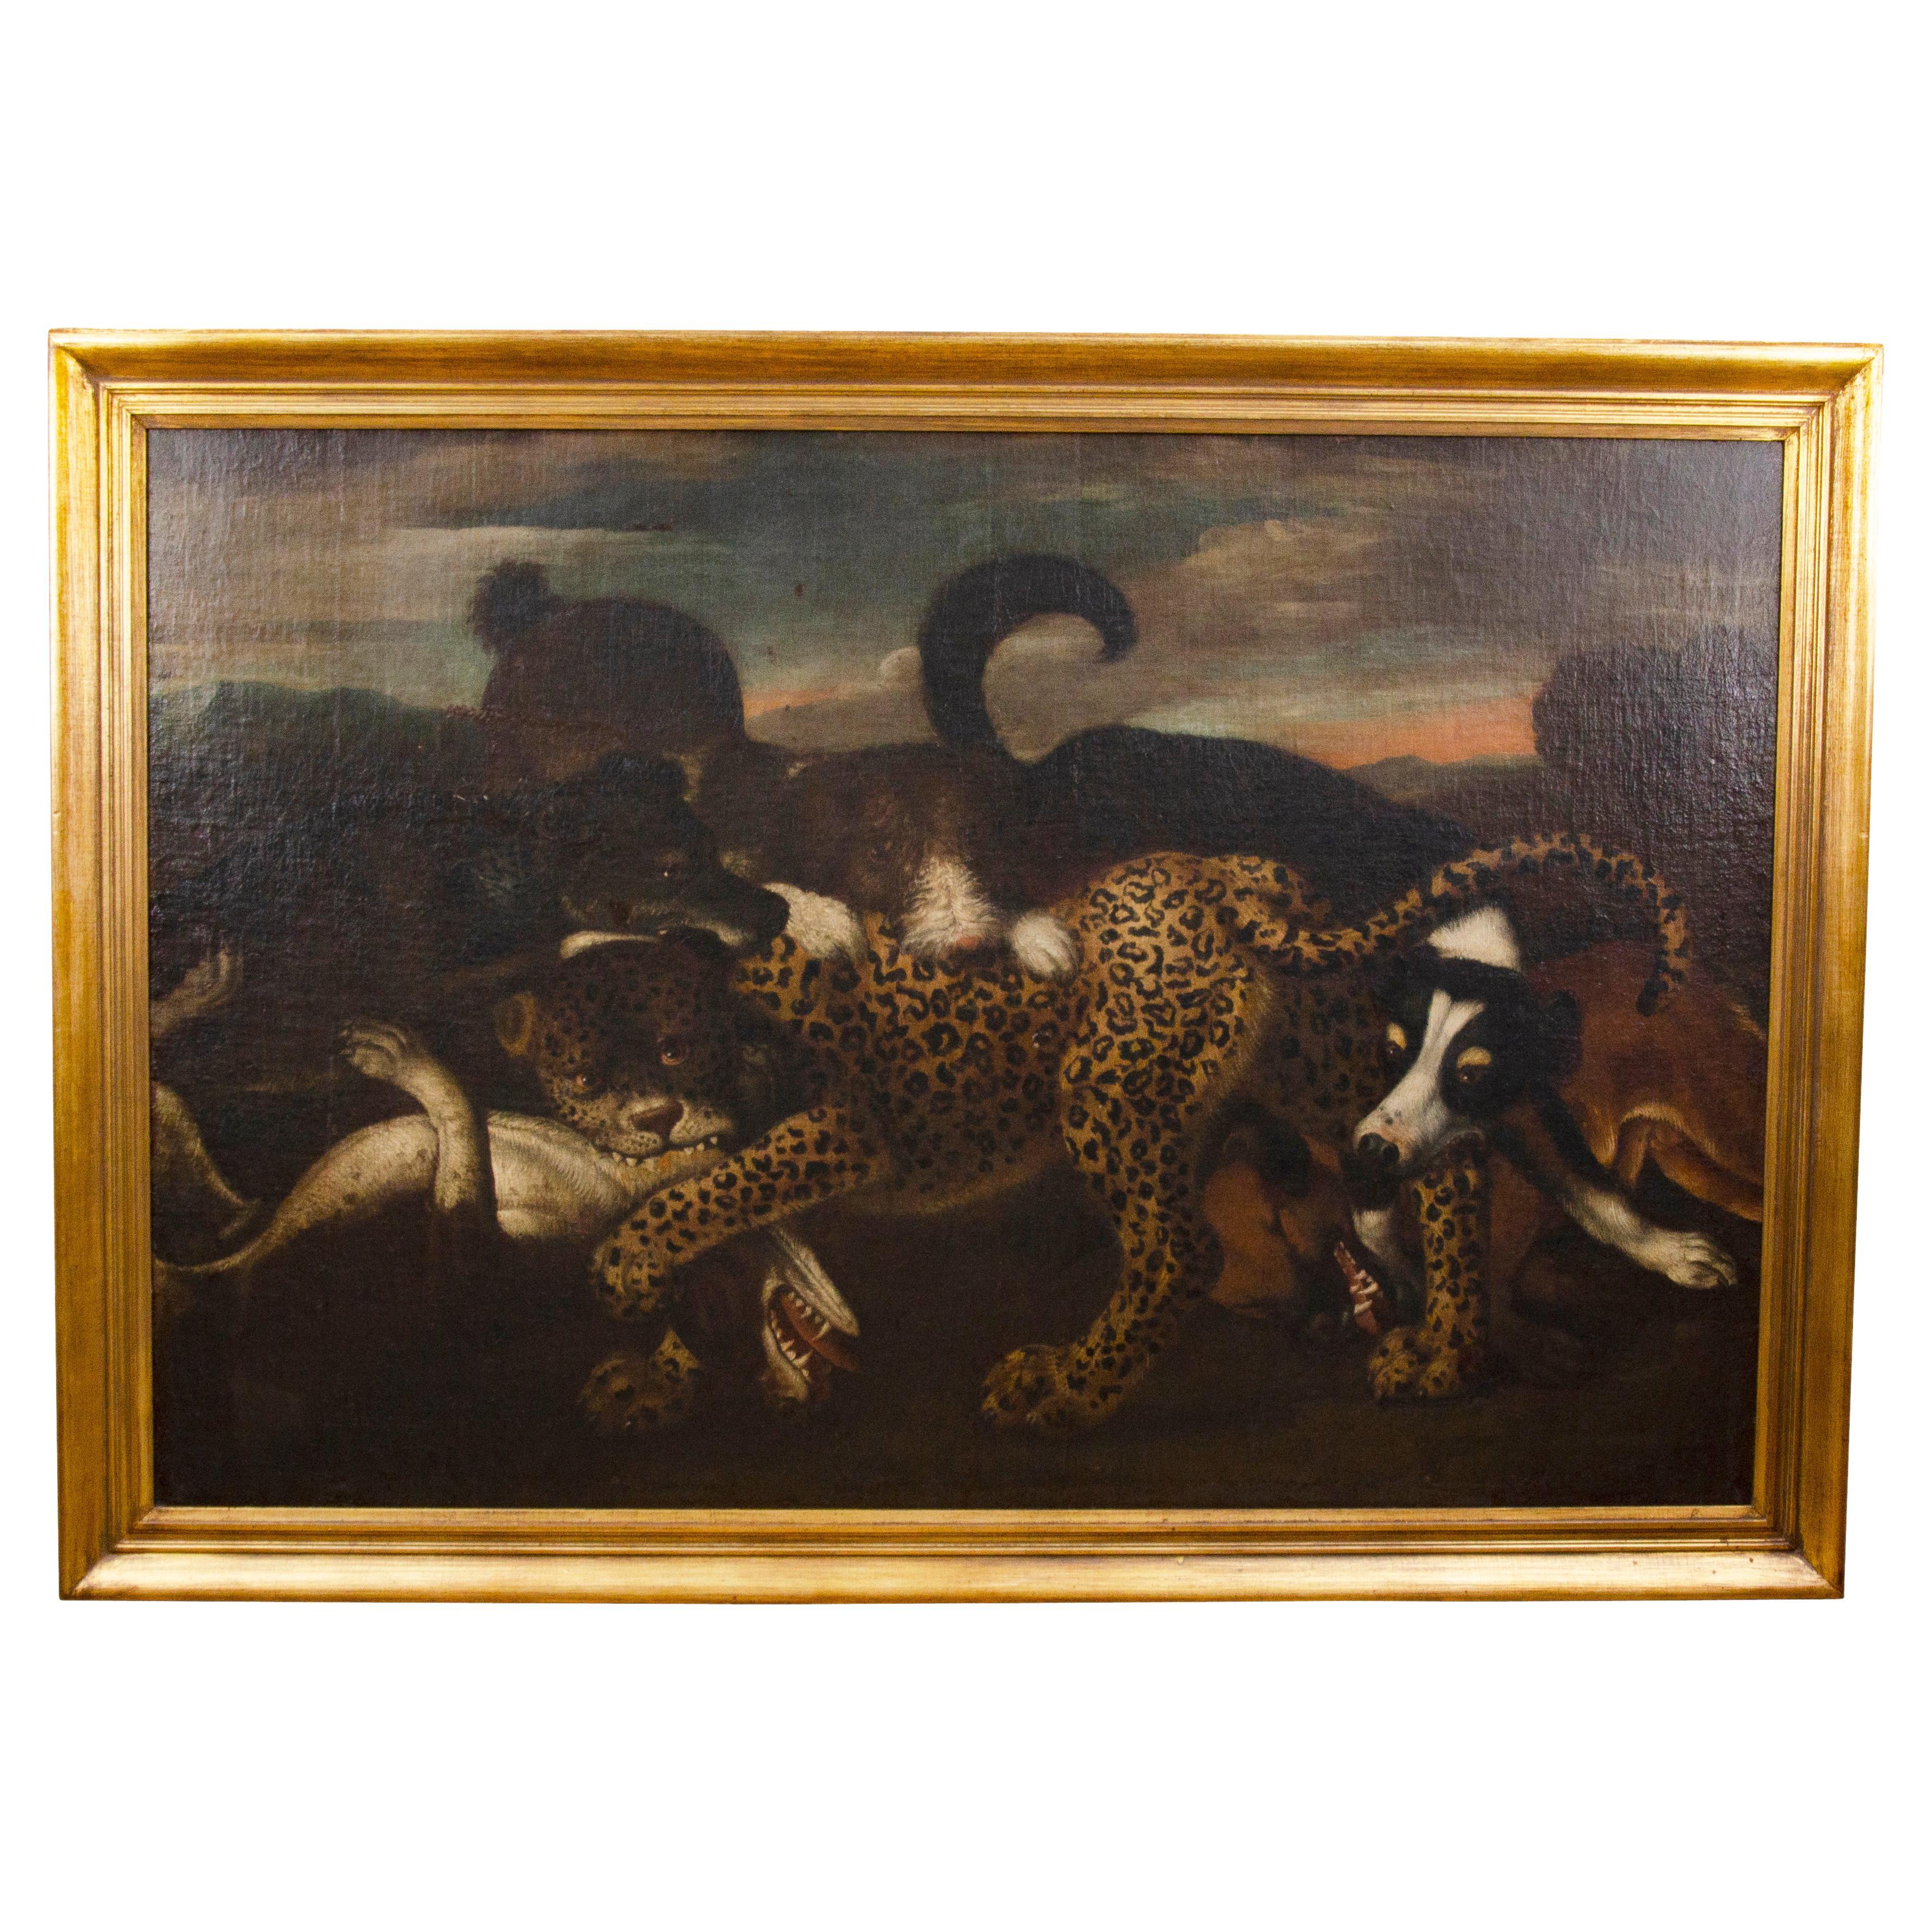 European Oil on Canvas of a Leopard Being Attacked by Dogs